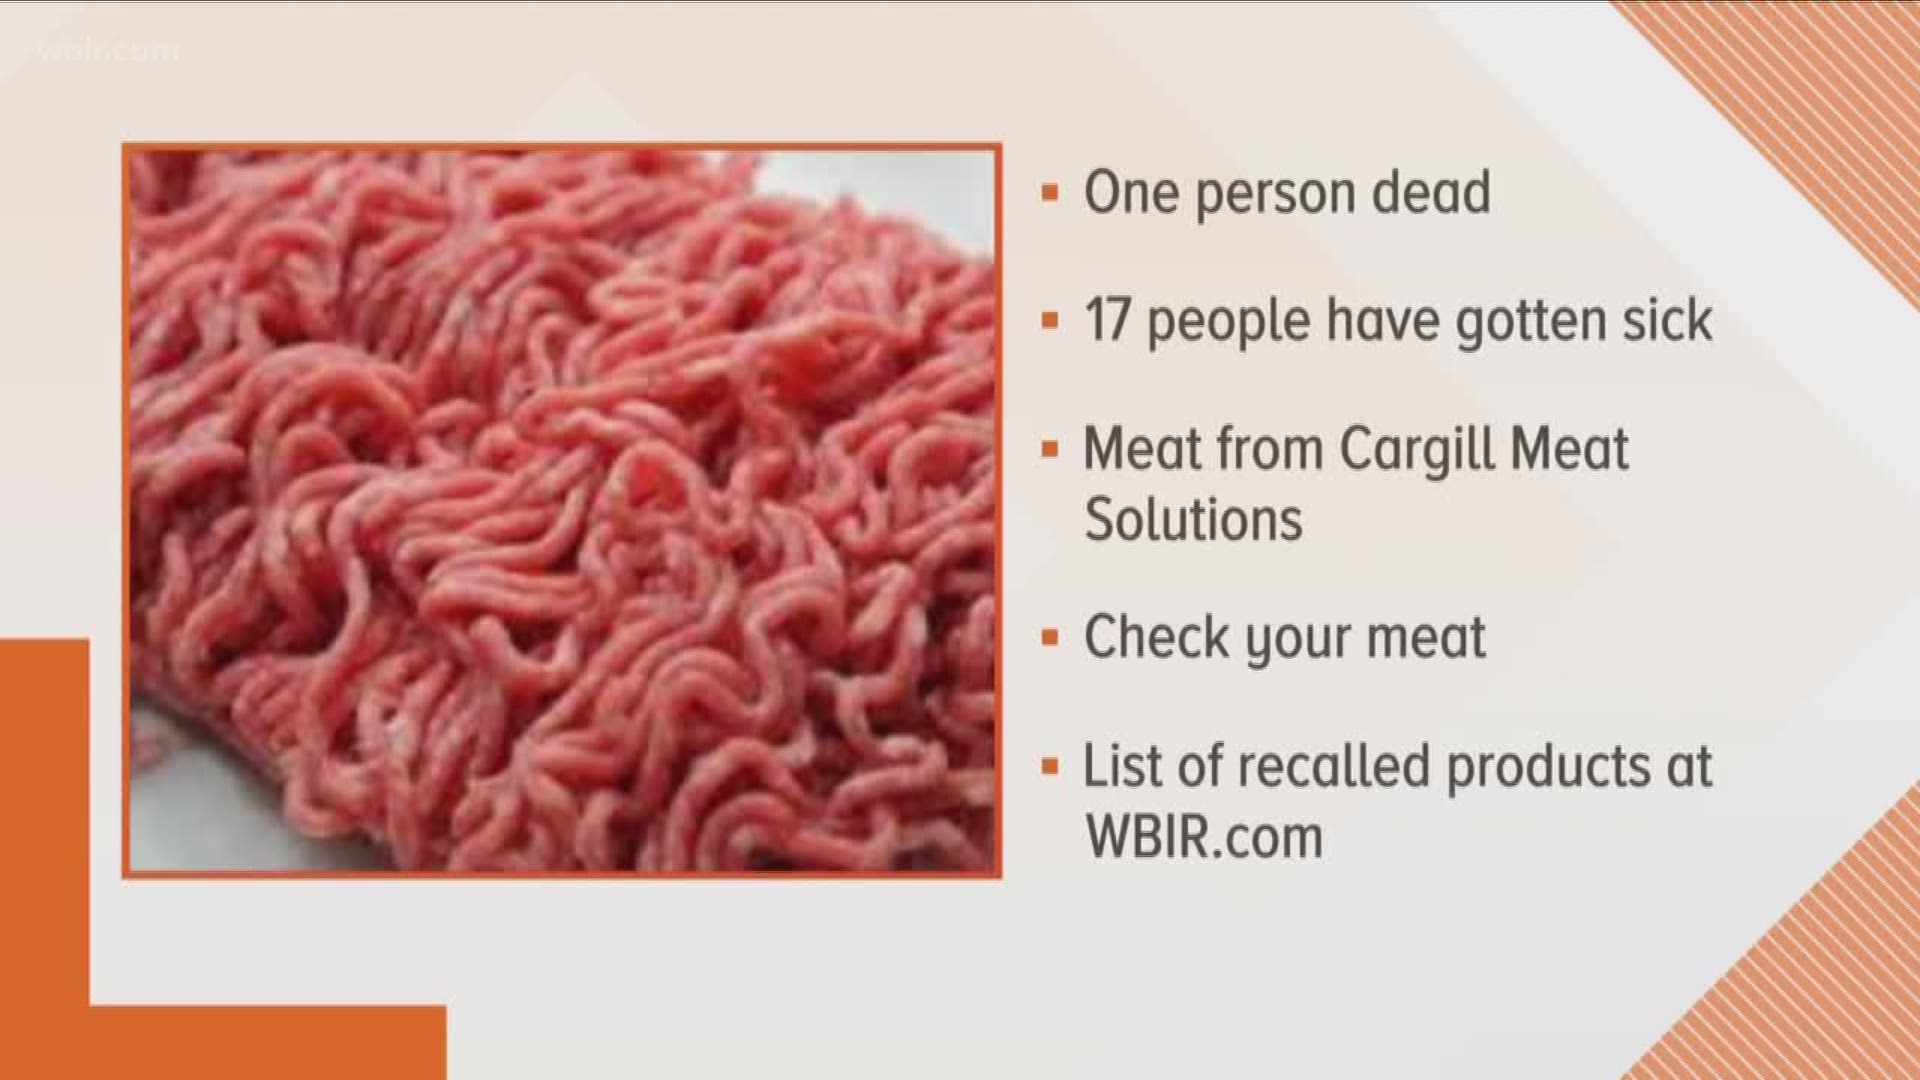 The USDA and CDC says at least one person has died and 17 people have gotten sick from what was likely raw ground beef.